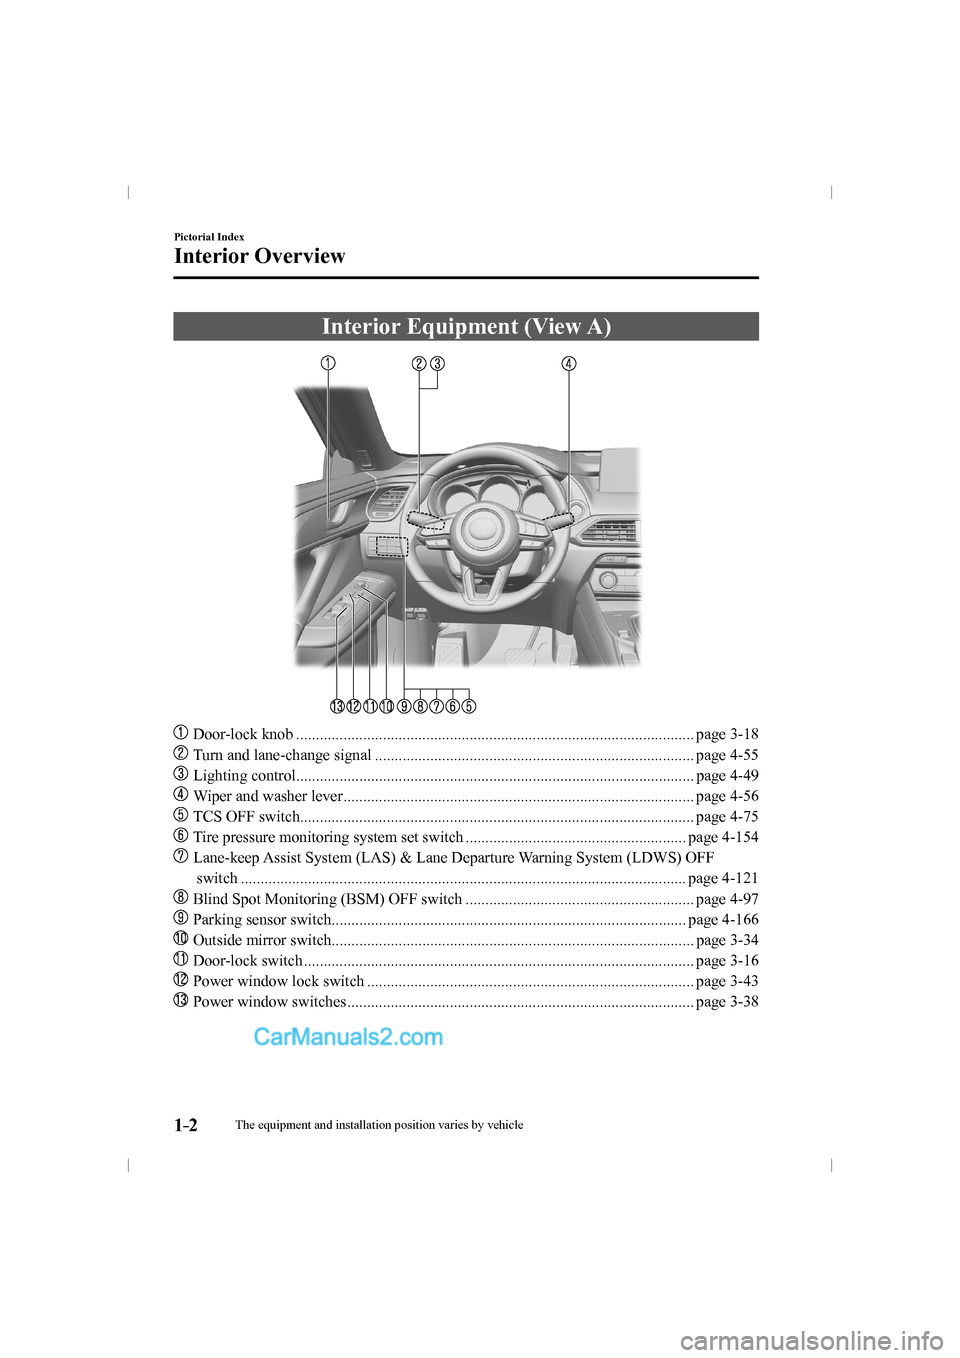 MAZDA MODEL CX-9 2016  Owners Manual (in English) 1–2
Pictorial Index
Interior Overview
      Interior  Equipment  (View  A)
    
���
  Door-lock knob ..............................................................................................